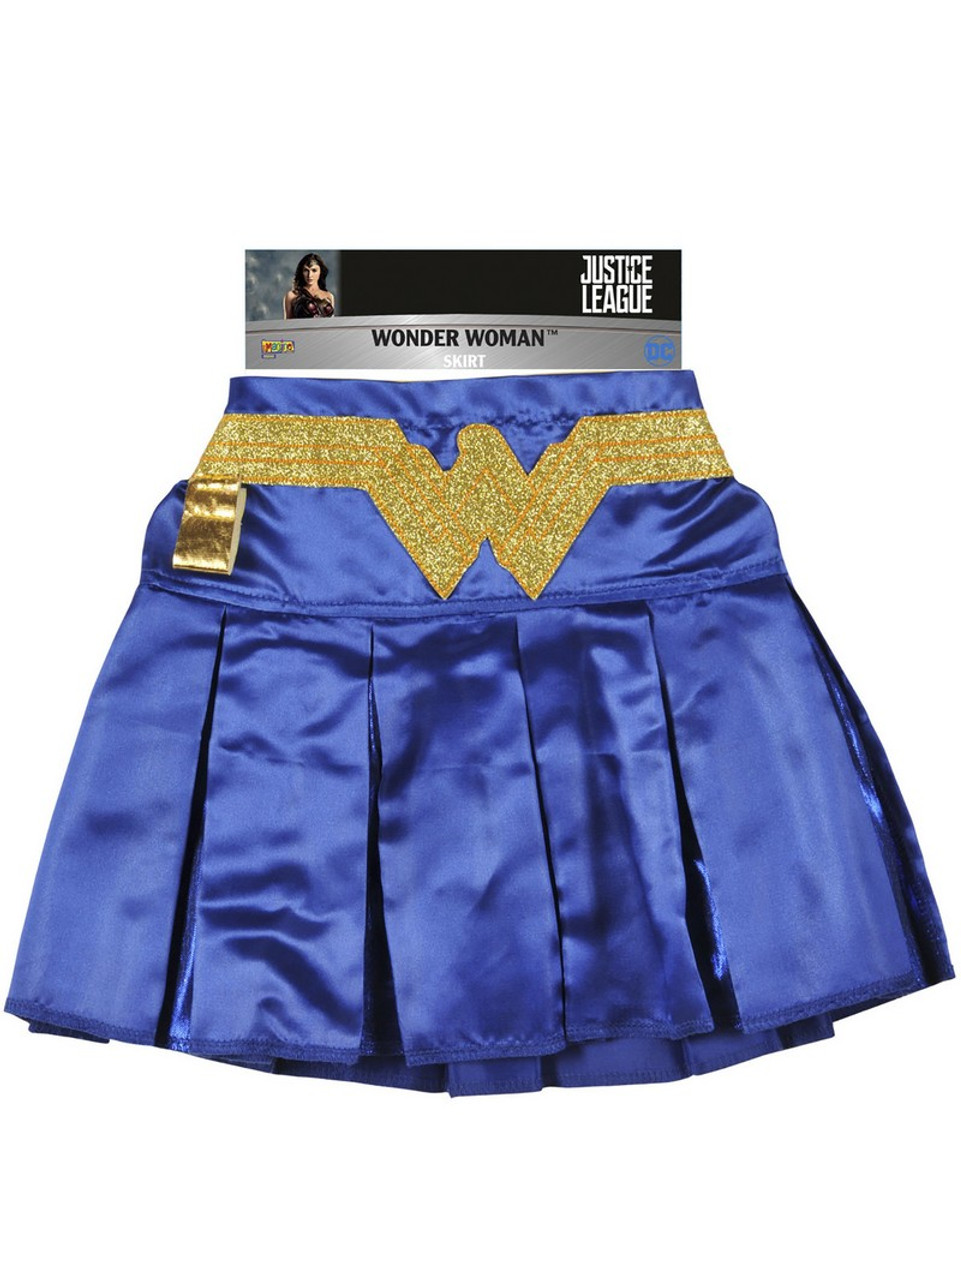 Girls Justice League Wonder Woman Pleated Skirt Inset